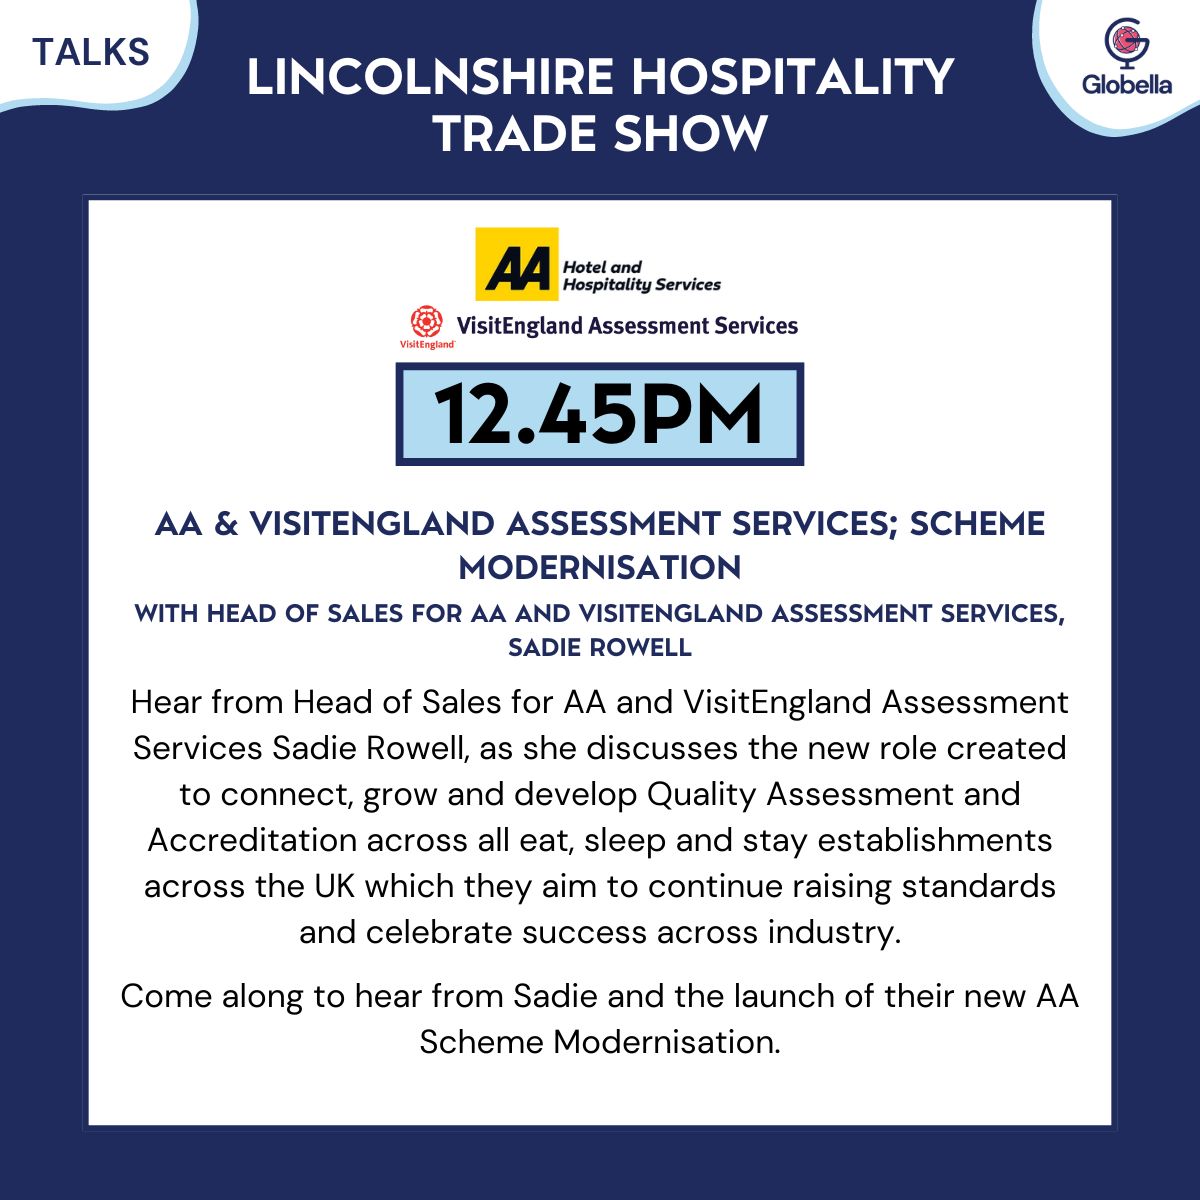 There’s only 1 week to go until the Lincolnshire Hospitality Trade Show on 15 May! Join our colleague Sadie as she discusses how we’re raising #hospitality standards by modernising our schemes! Get your ticket! > tinyurl.com/4uw3du92 #Hospitality #TradeShow #Lincolnshire